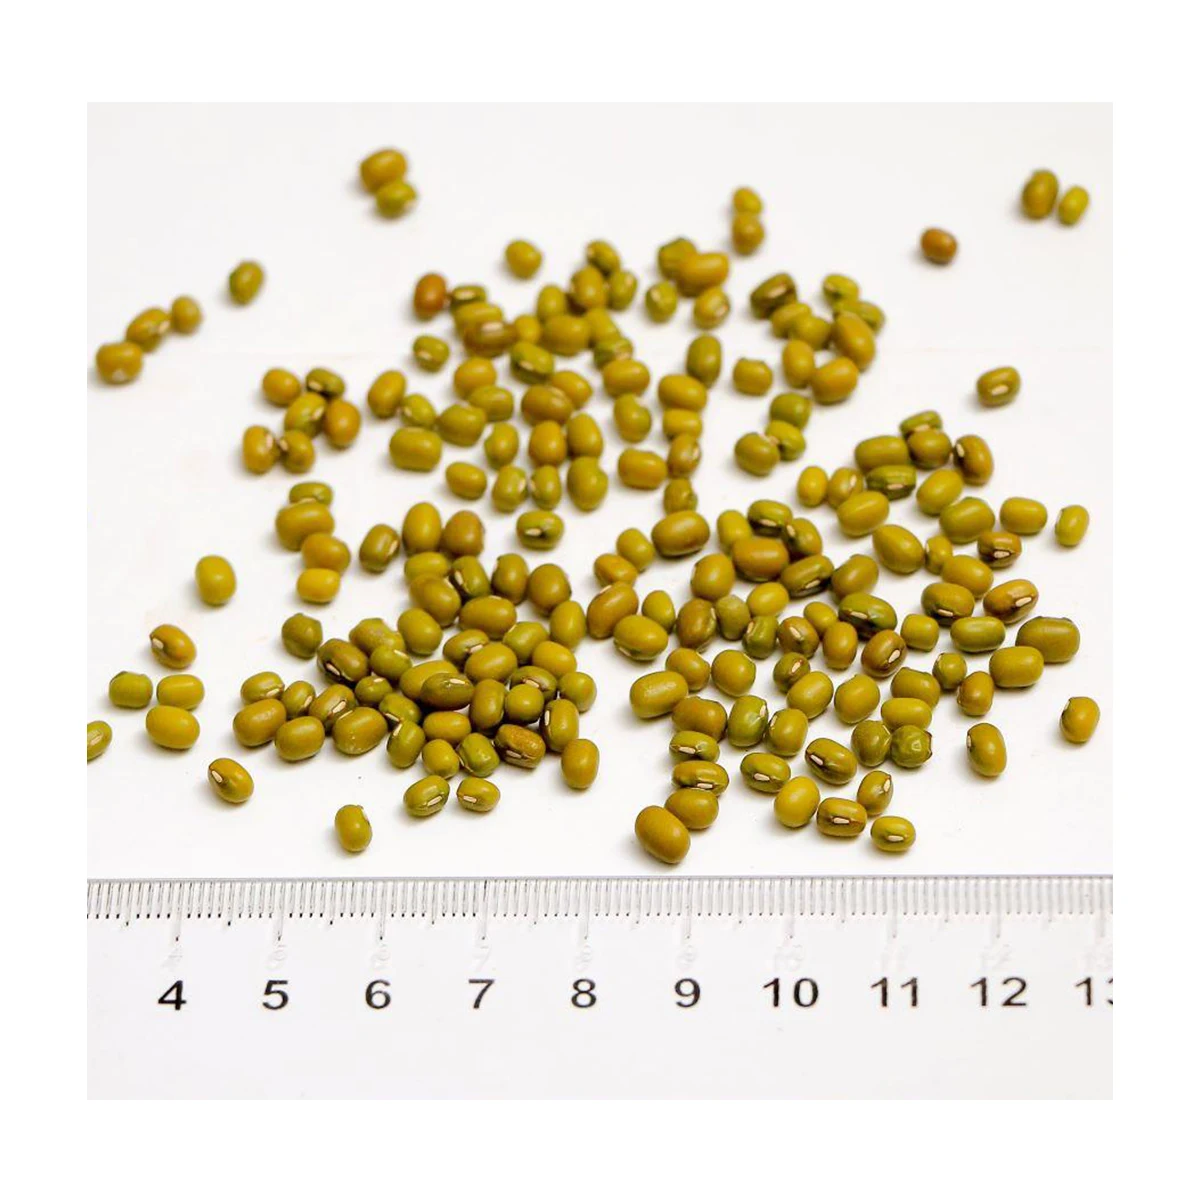 High grade non-GMO wholesale 100% natural products from Uzbekistan mung dal green mung beans 3+ for food